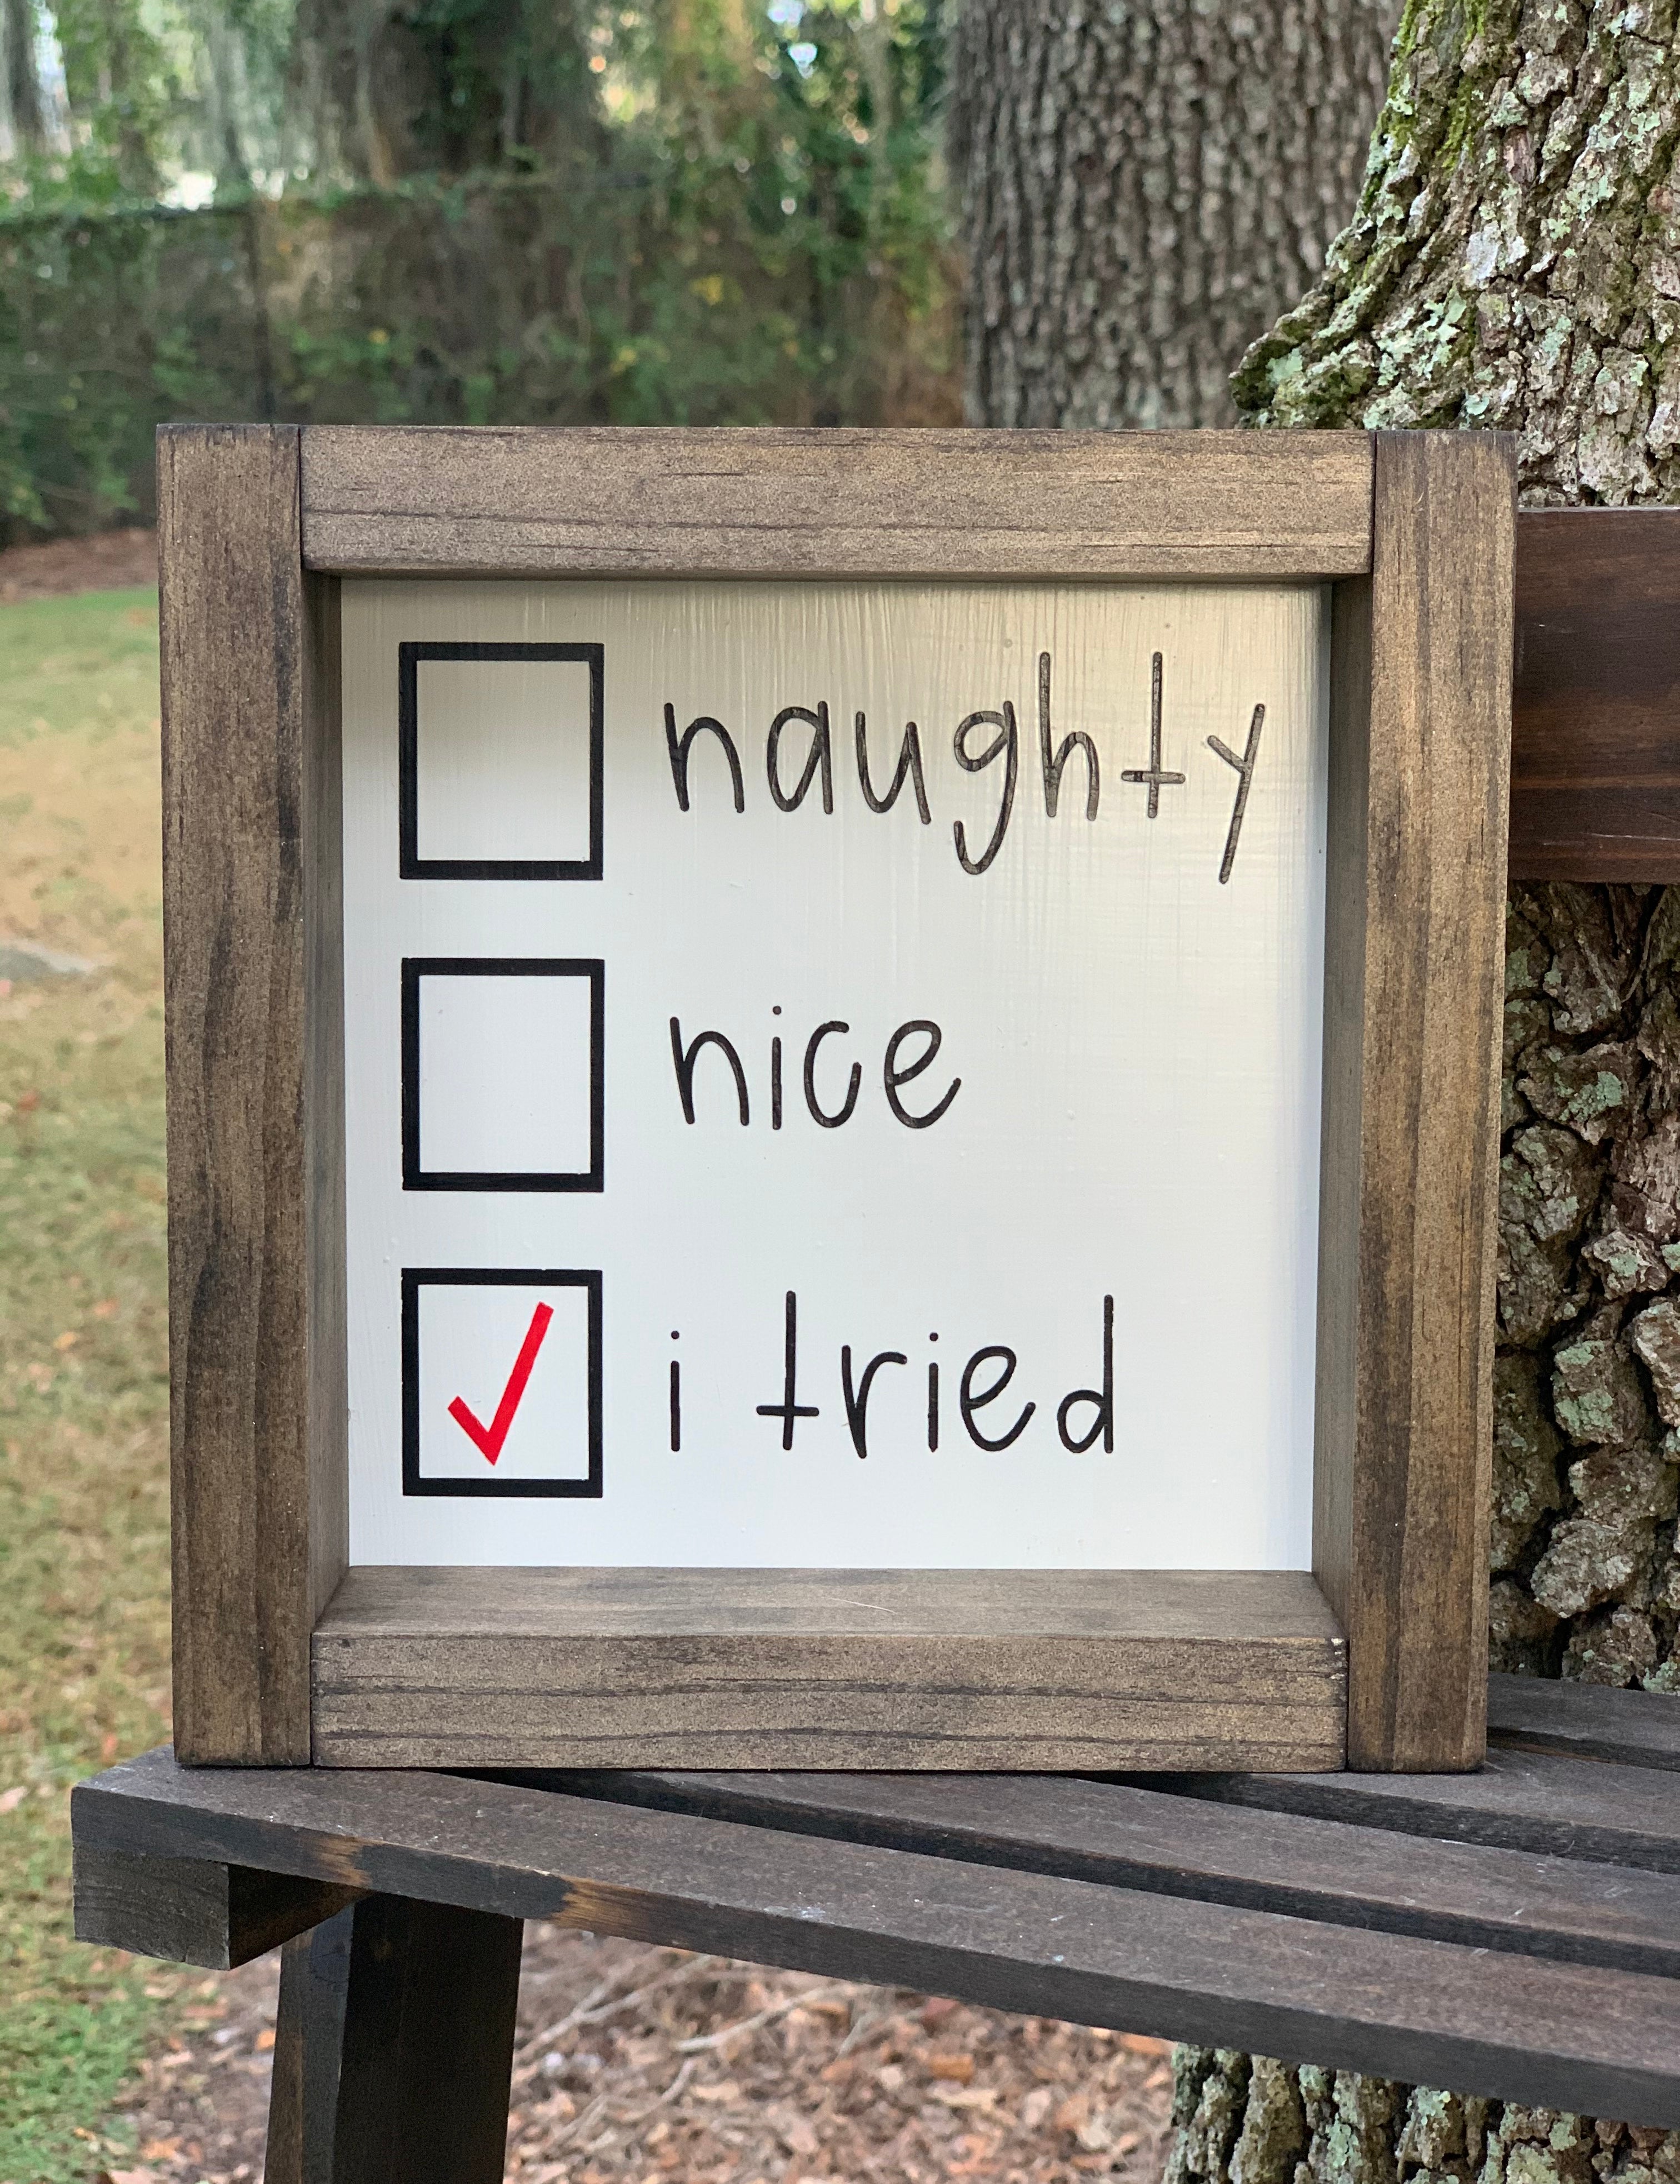 This image shows the Naughty, Nice, I Tried sign by itself.  There is a red check mark in the box for I tried.